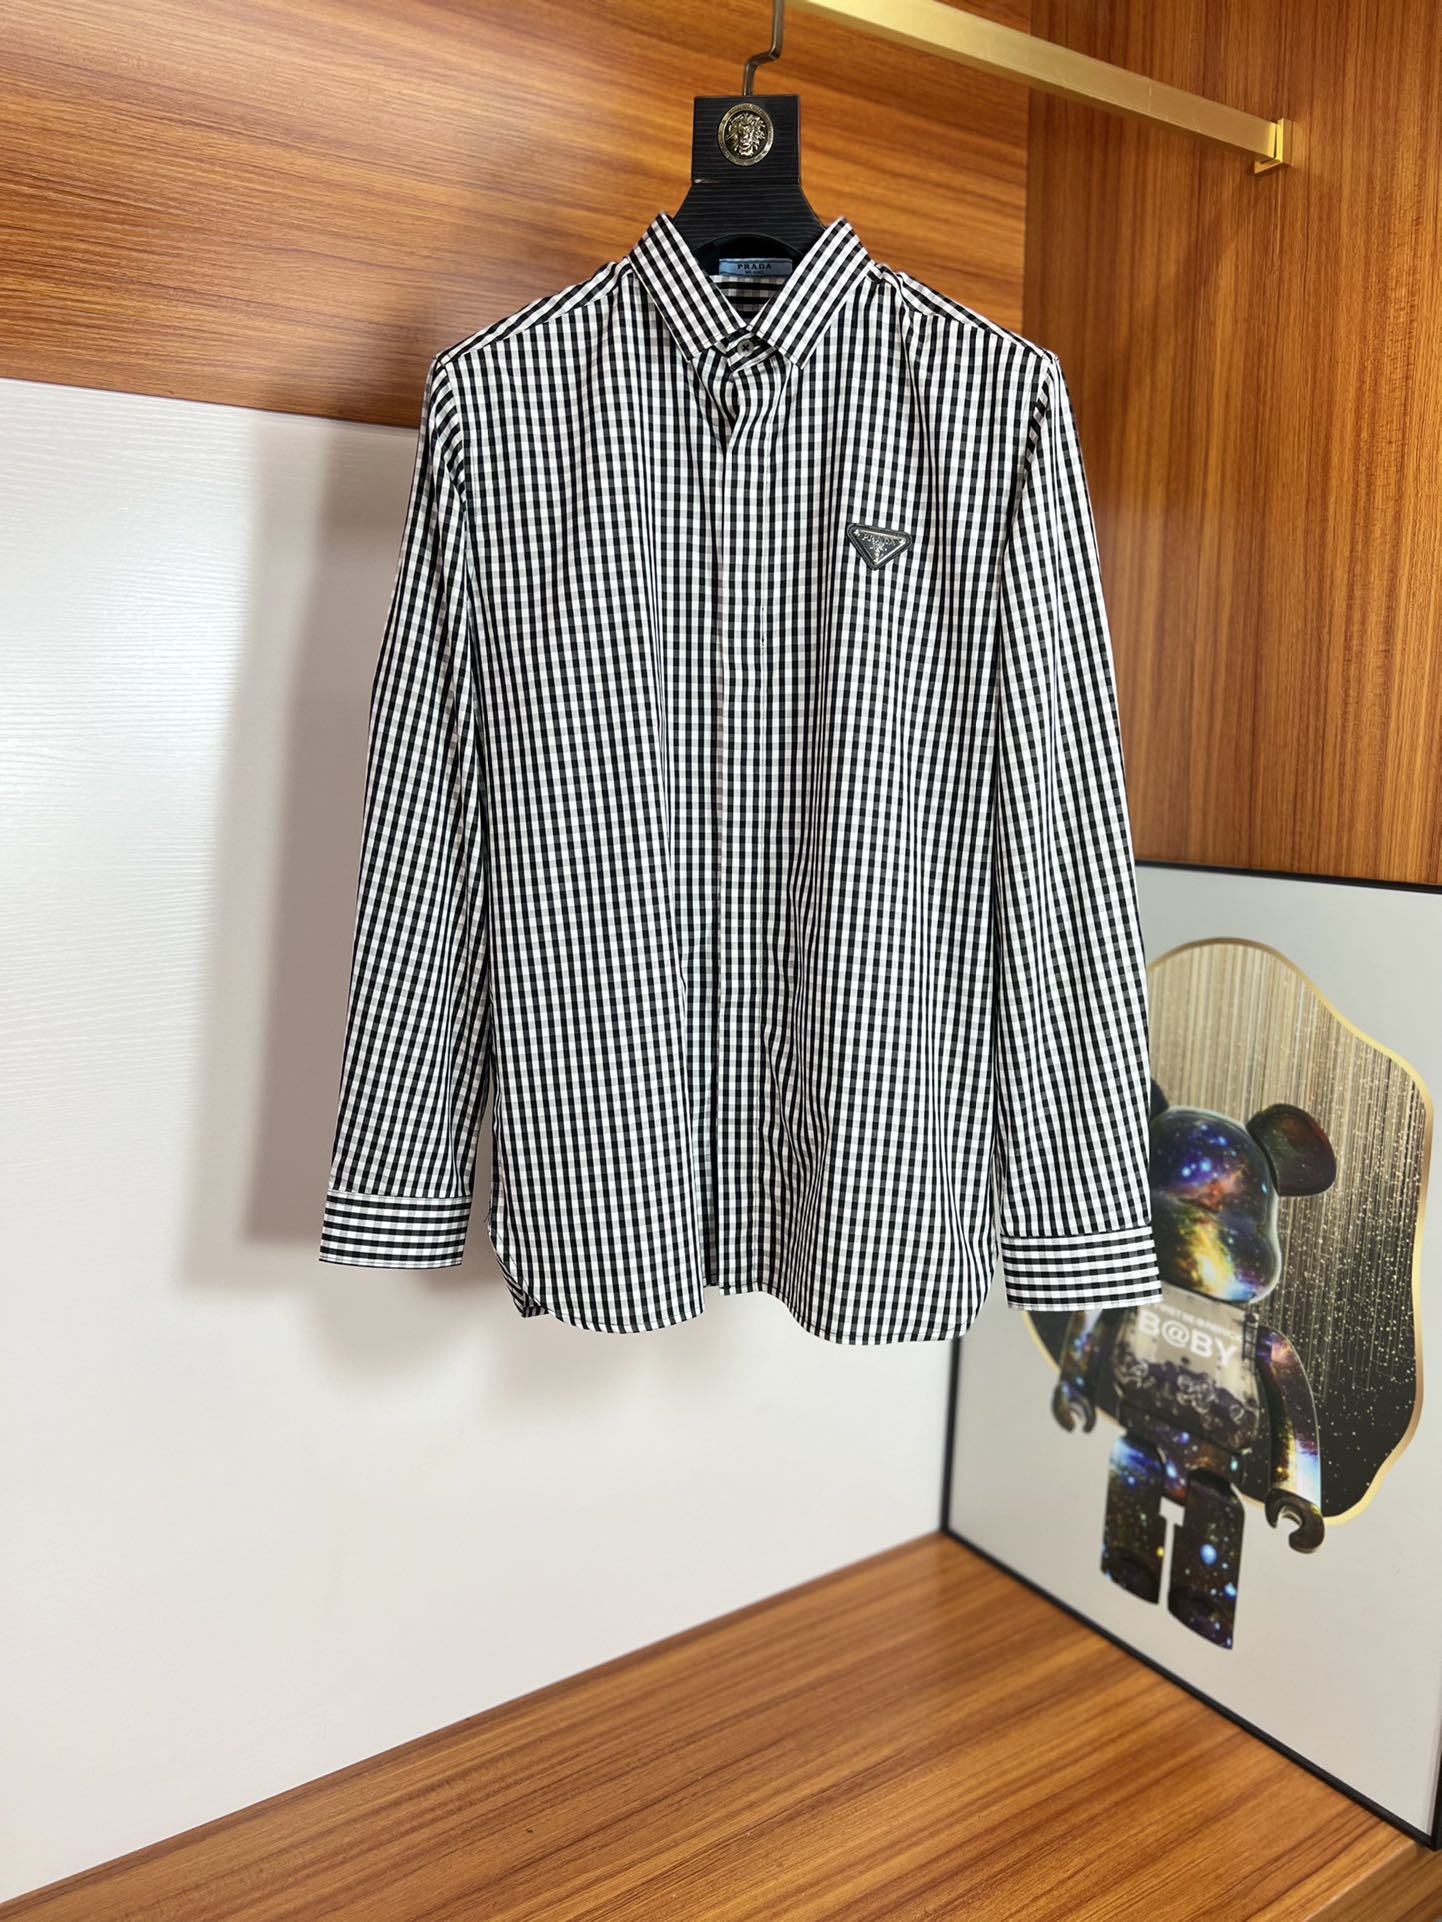 Prada Clothing Shirts & Blouses Fall/Winter Collection